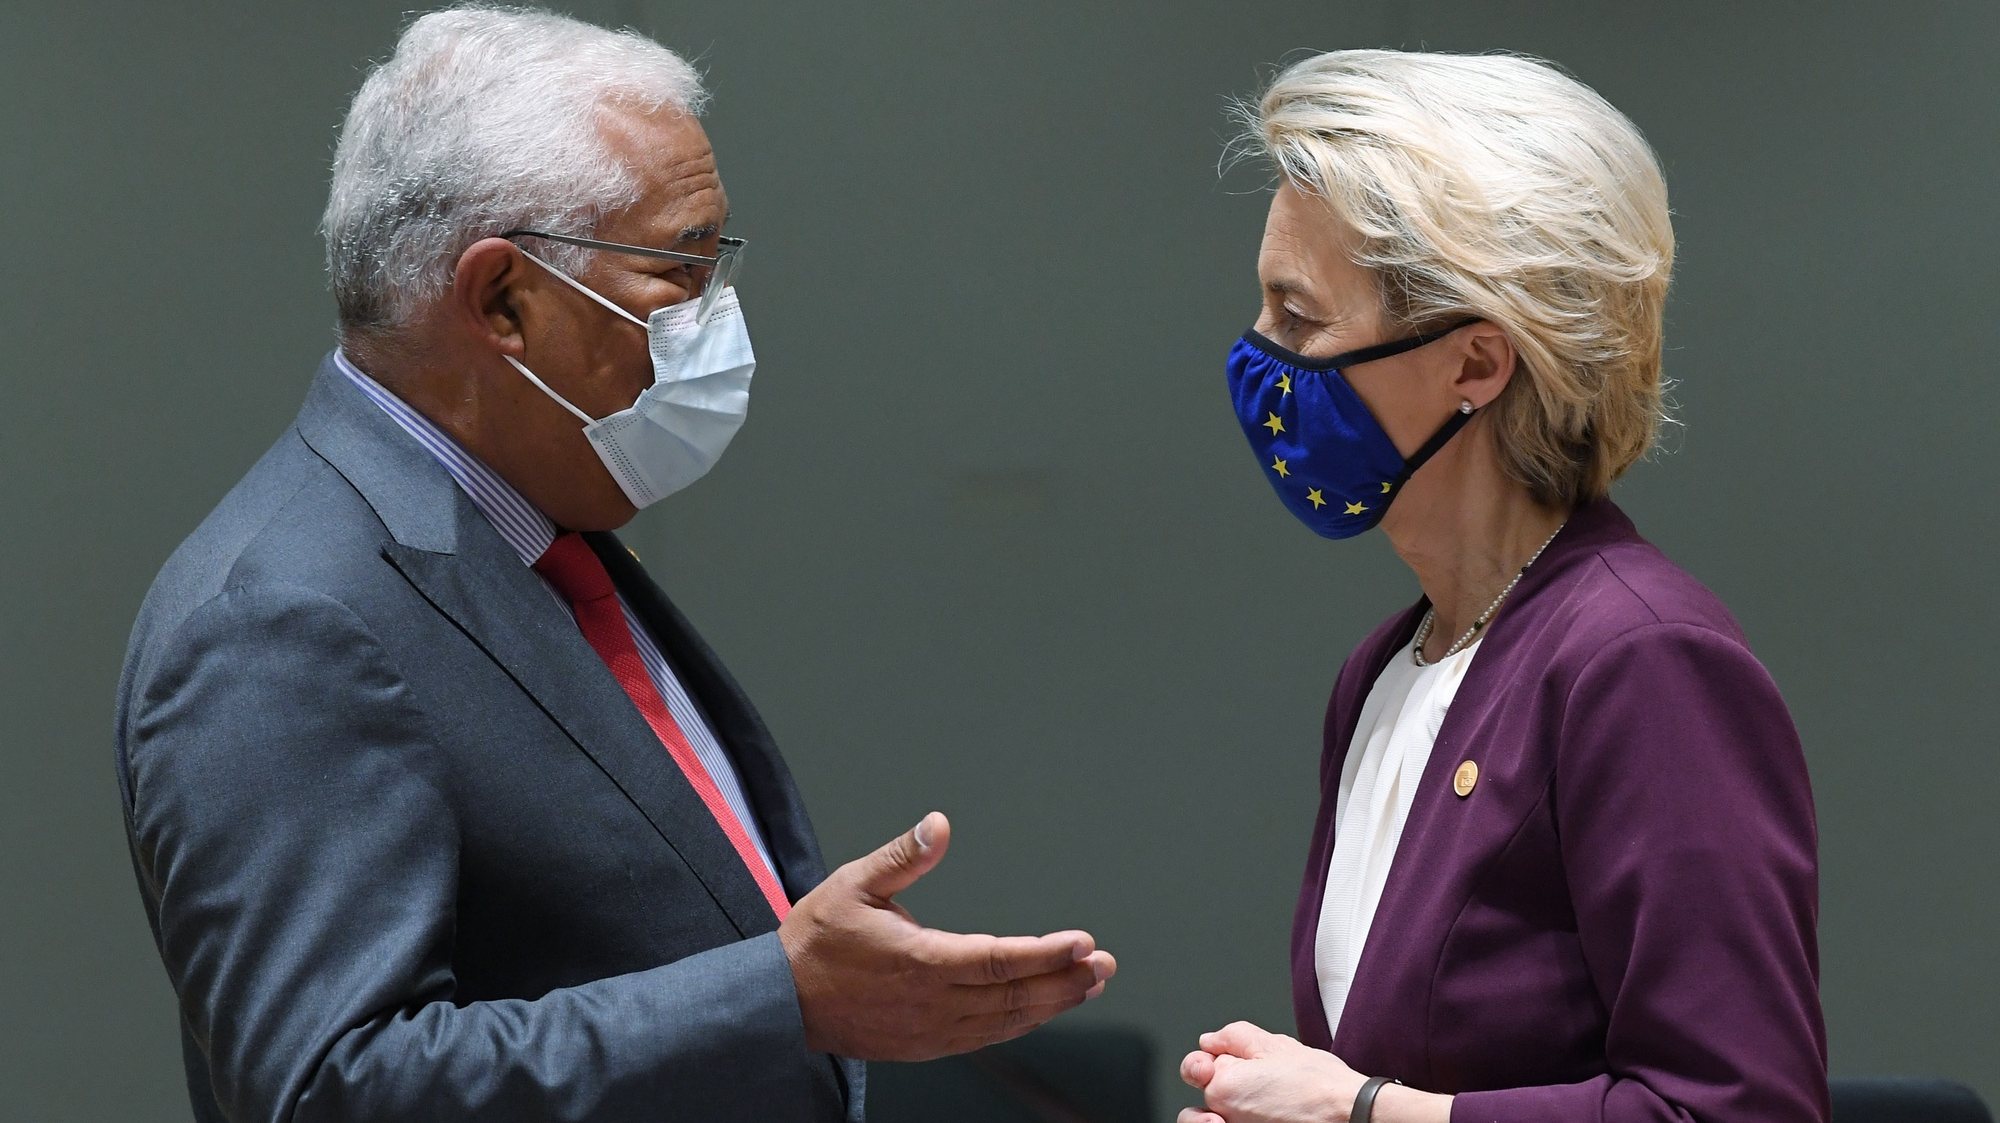 epa09538490 Portugal&#039;s Prime Minister Antonio Costa (L) speaks with President of the European Commission Ursula von der Leyen on the second day of a European Union (EU) summit at The European Council Building in Brussels, Belgium, 22 October 2021. EU leaders meet in Brussels on 21 and 22 October, to discuss COVID-19, digital transformation, energy prices, migration, trade and external relations.  EPA/JOHN THYS / POOL